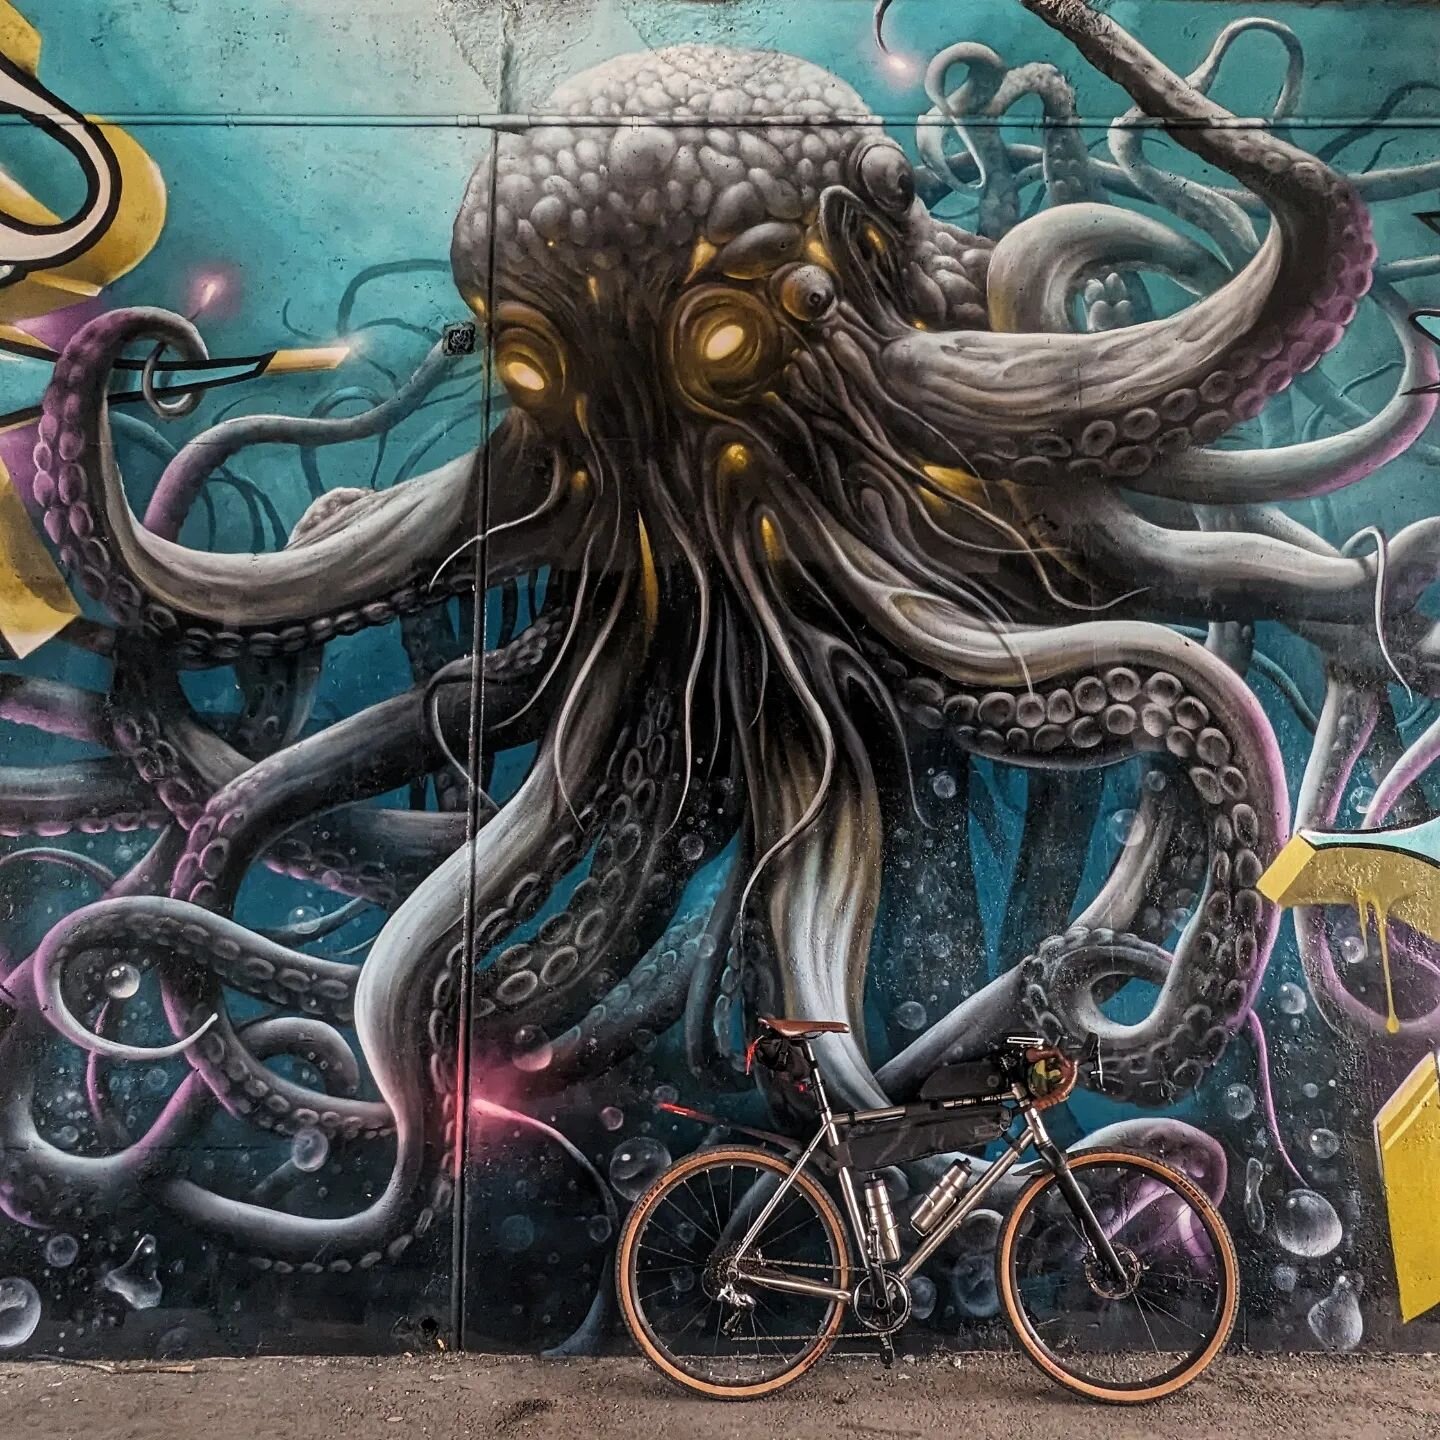 🏙️ Real estate is the new art? 🎨
.
.
.
You've probably seen me riding around the city on the hunt for #streetart #graffiti #concretecanvas @concretecanvasfest has brought some amazing #art to the city that's already booming with #murals this is jus